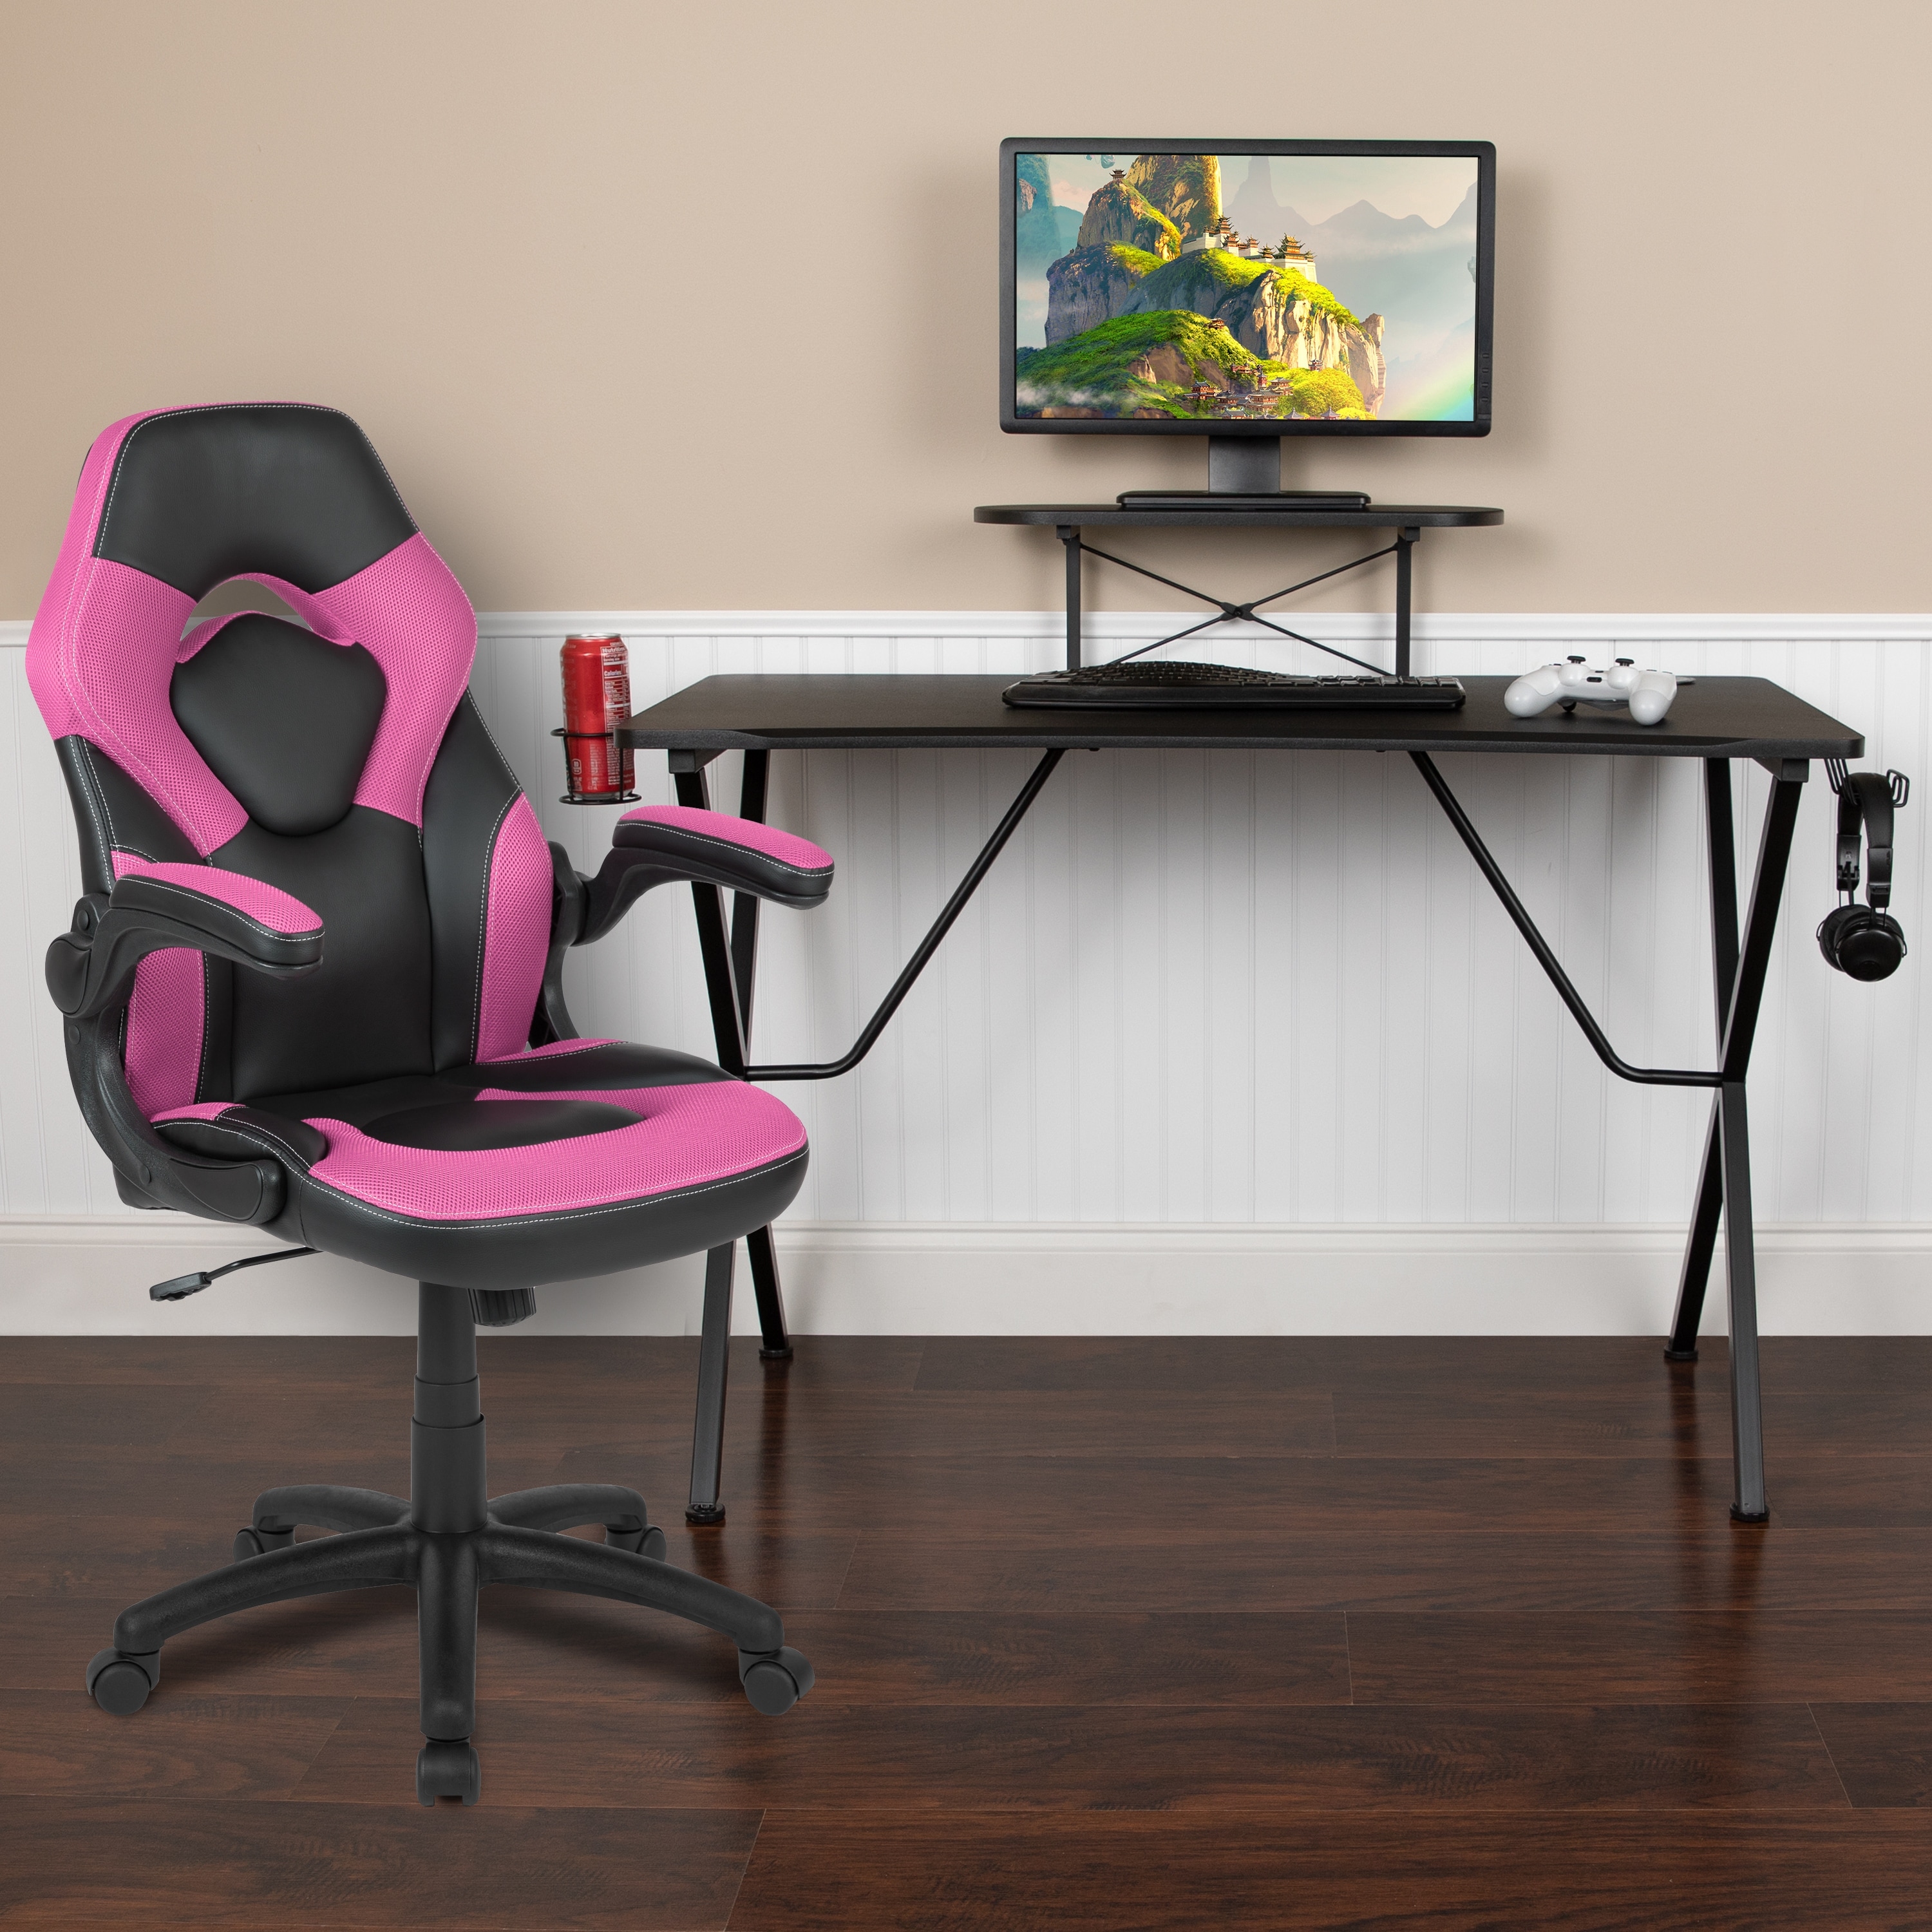 https://ak1.ostkcdn.com/images/products/is/images/direct/89d224c59026720892c3d8f6e9853e595b6830eb/Gaming-Desk-%26-Chair-Set-with-Cup-Holder%2C-Headphone-Hook%2C-and-Monitor-Stand.jpg